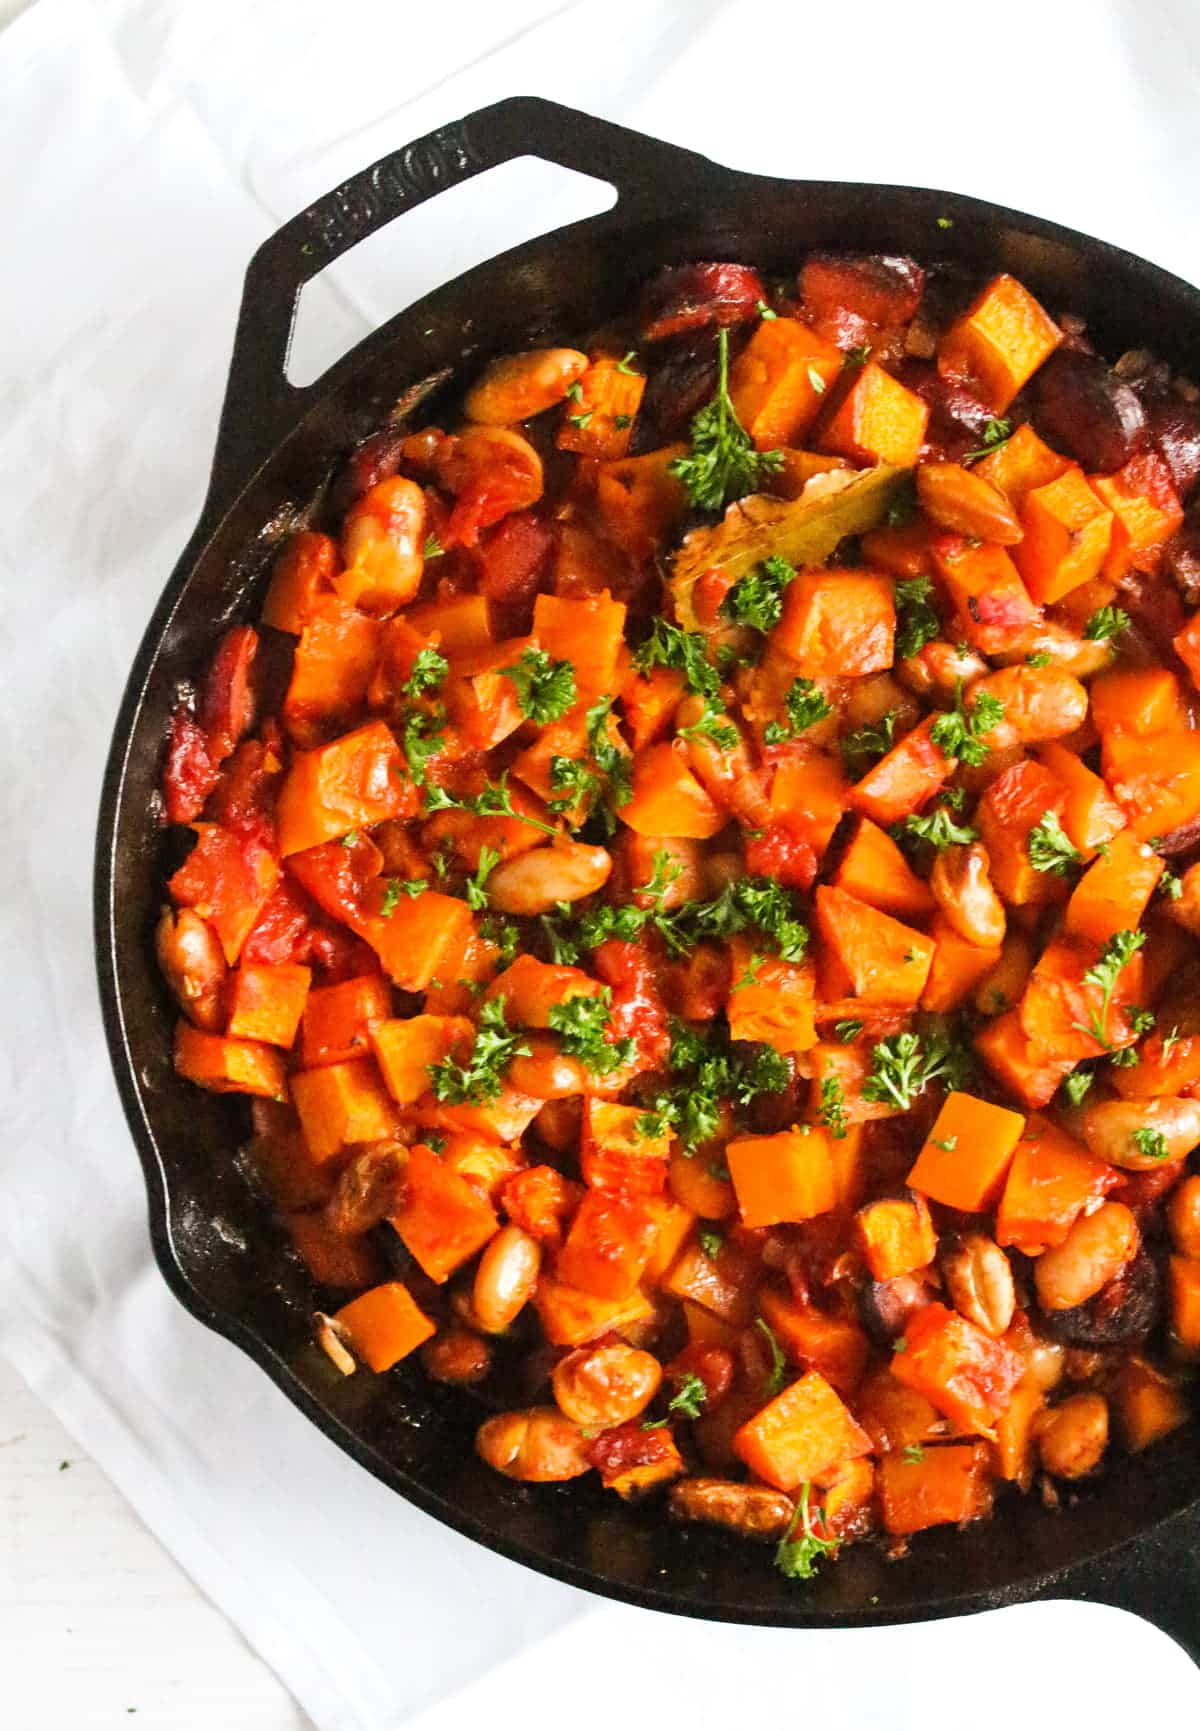 skillet with beans, cabanossi, pumpkin and parsley on top.